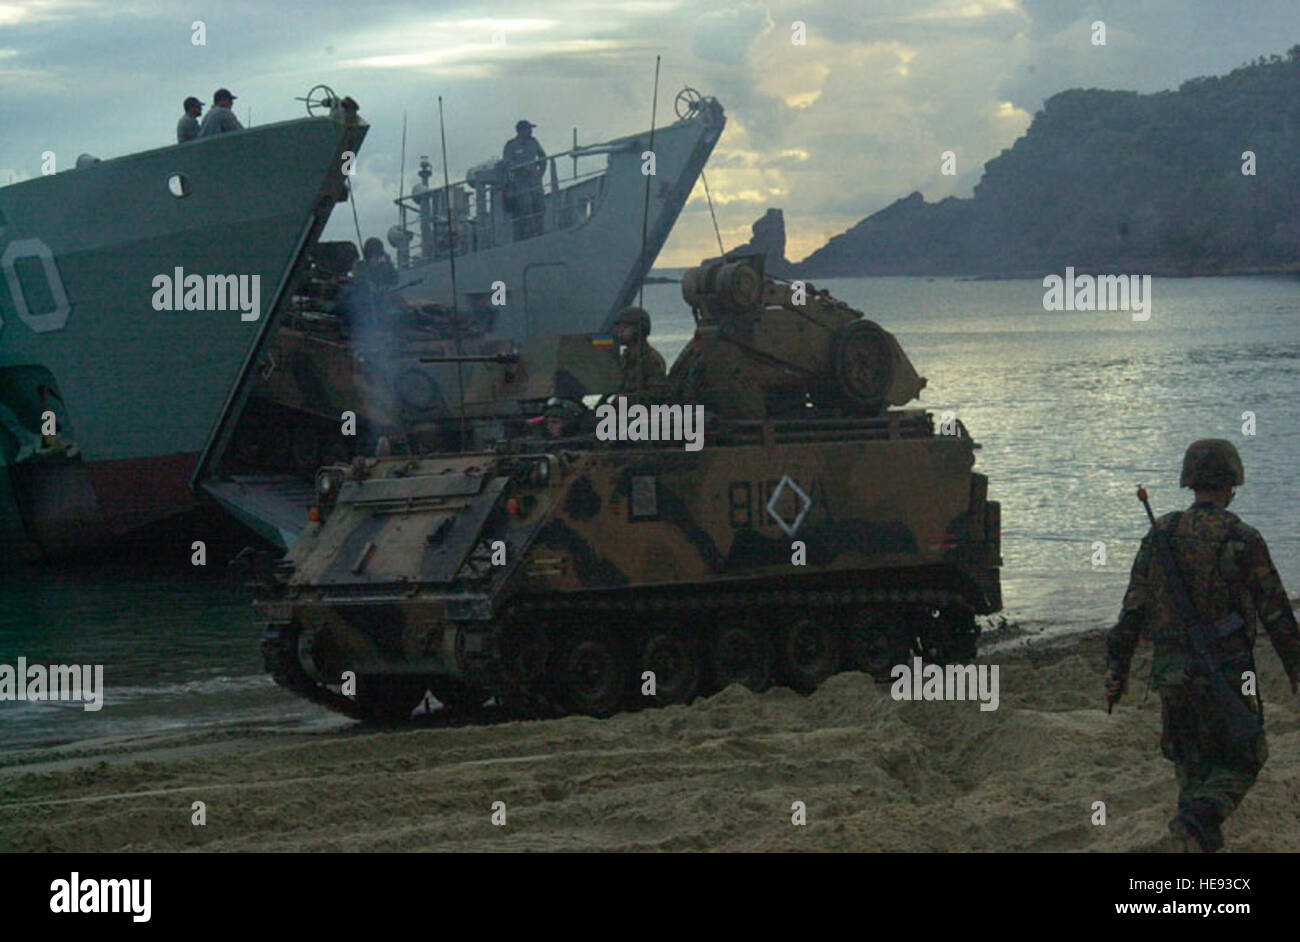 010518-O-1168M-014 -- EXERCISE TANDEM THRUST 2001, SHOALWATER BAY, Australia  -- An M113 Armored Personnel Carrier (APC)  debarks a Landing Craft Vehicle (LCV) during an amphibious landing exercise on Freshwater Beach during Exercise Tandem Thrust.  Exercise Tandem Thrust 2001 is a combined United States, Australian and Canadian military training exercise. This biannual exercise is being held in the vicinity of Shoalwater Bay training area, Queensland, Australia.  More than 27,000 Soldiers, Sailors, Airmen and Marines are participating, with Canadian units taking part as opposing forces. The p Stock Photo